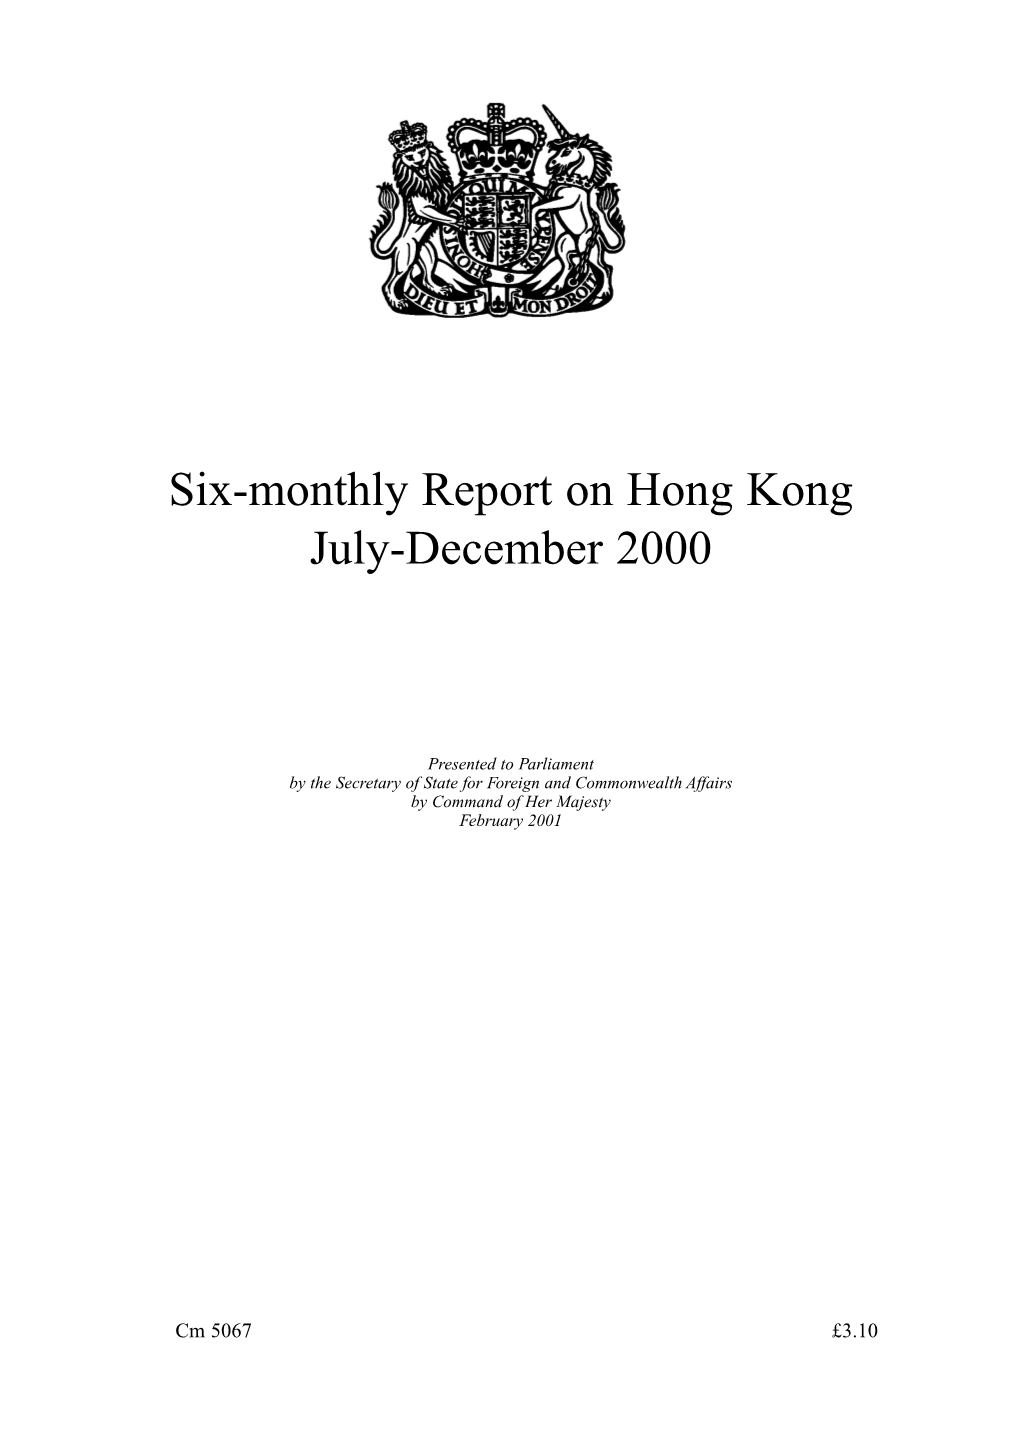 Six-Monthly Report on Hong Kong July-December 2000